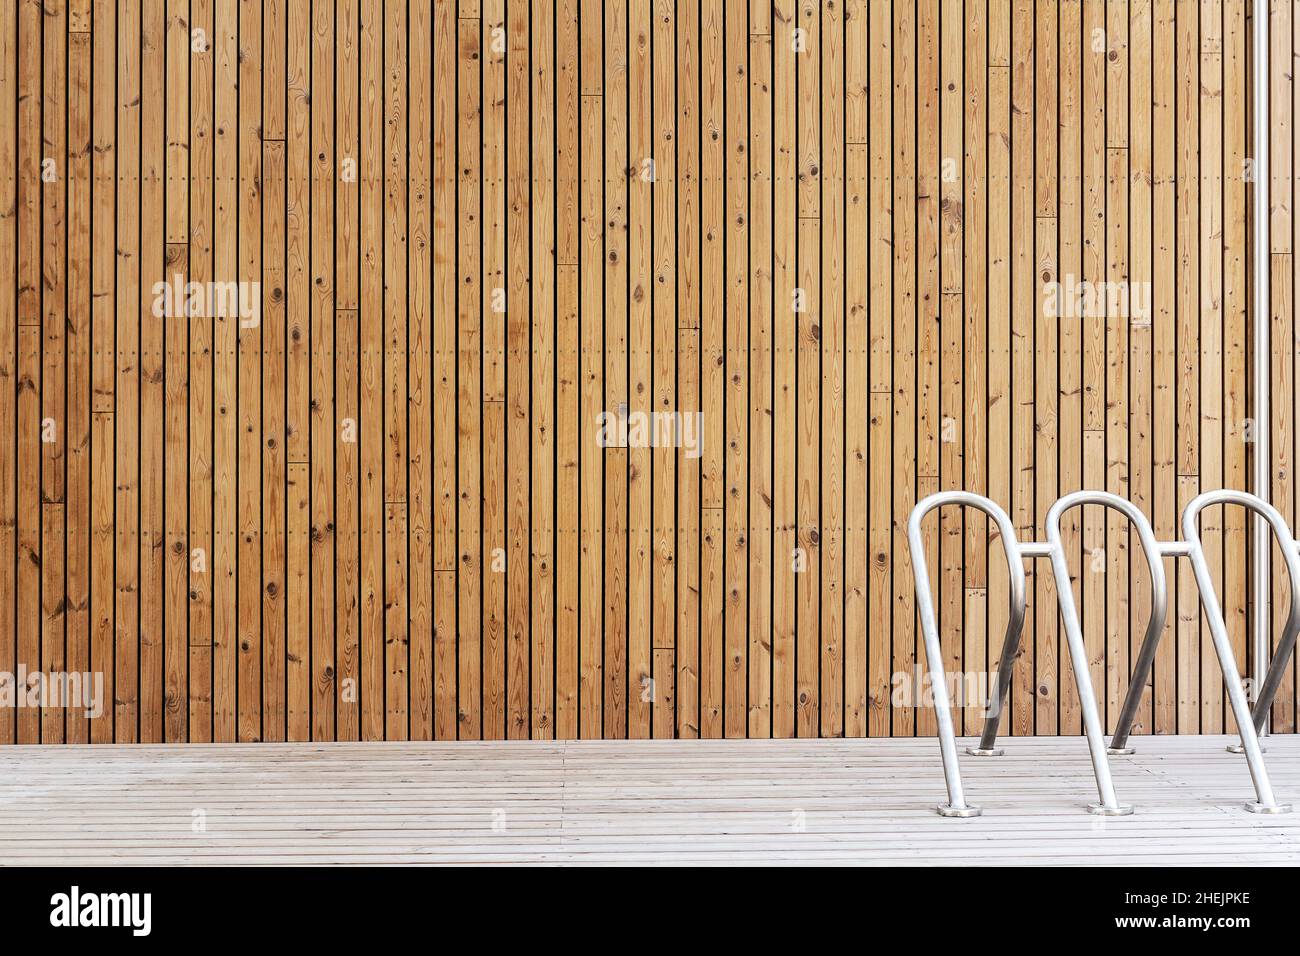 New vertical wooden plank wall and a bike stand Stock Photo